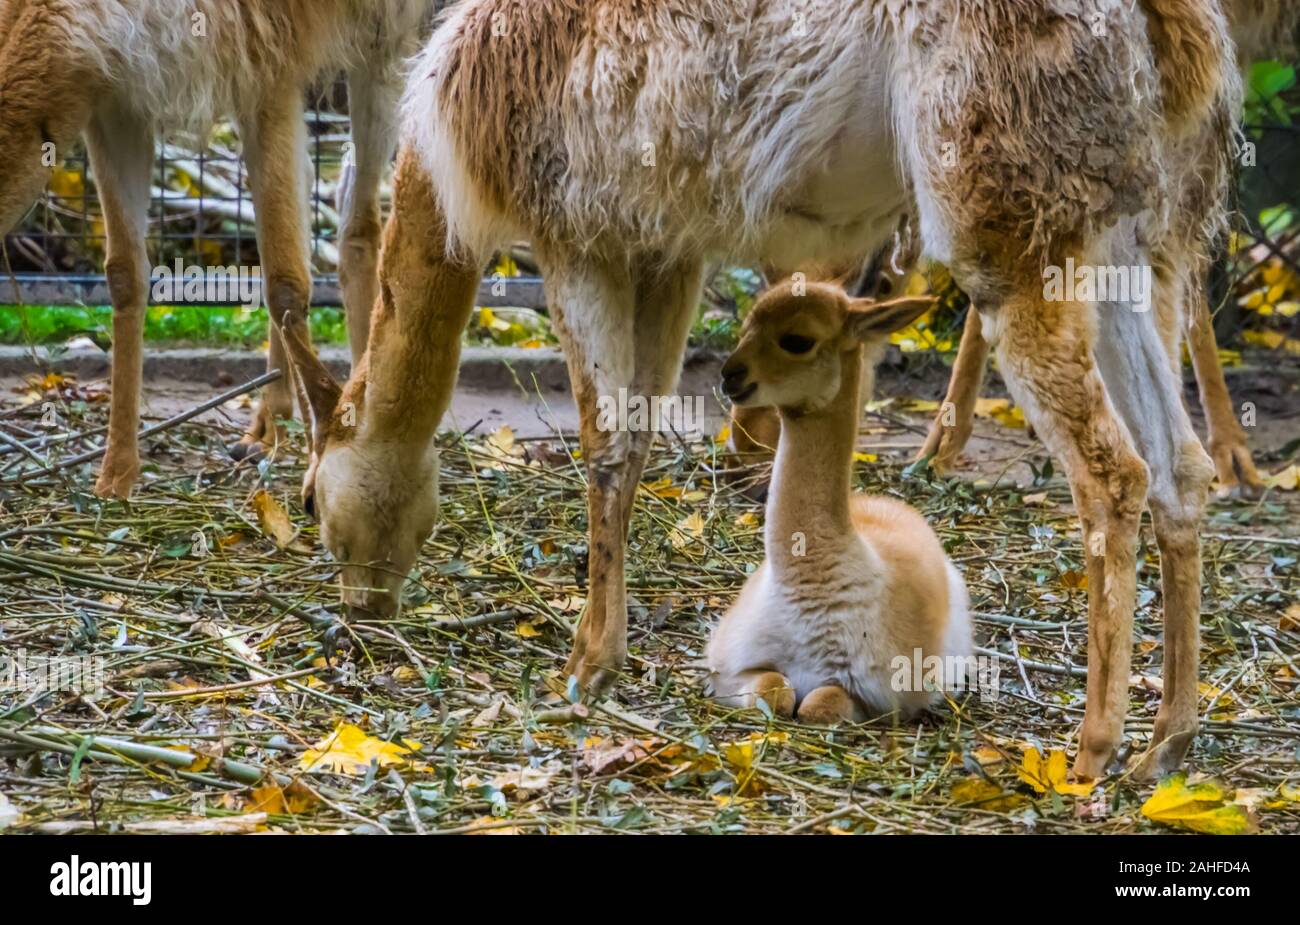 closeup of a vicuna baby sitting under its mother, Adorable animal family portrait, Specie related to the camel and alpaca Stock Photo